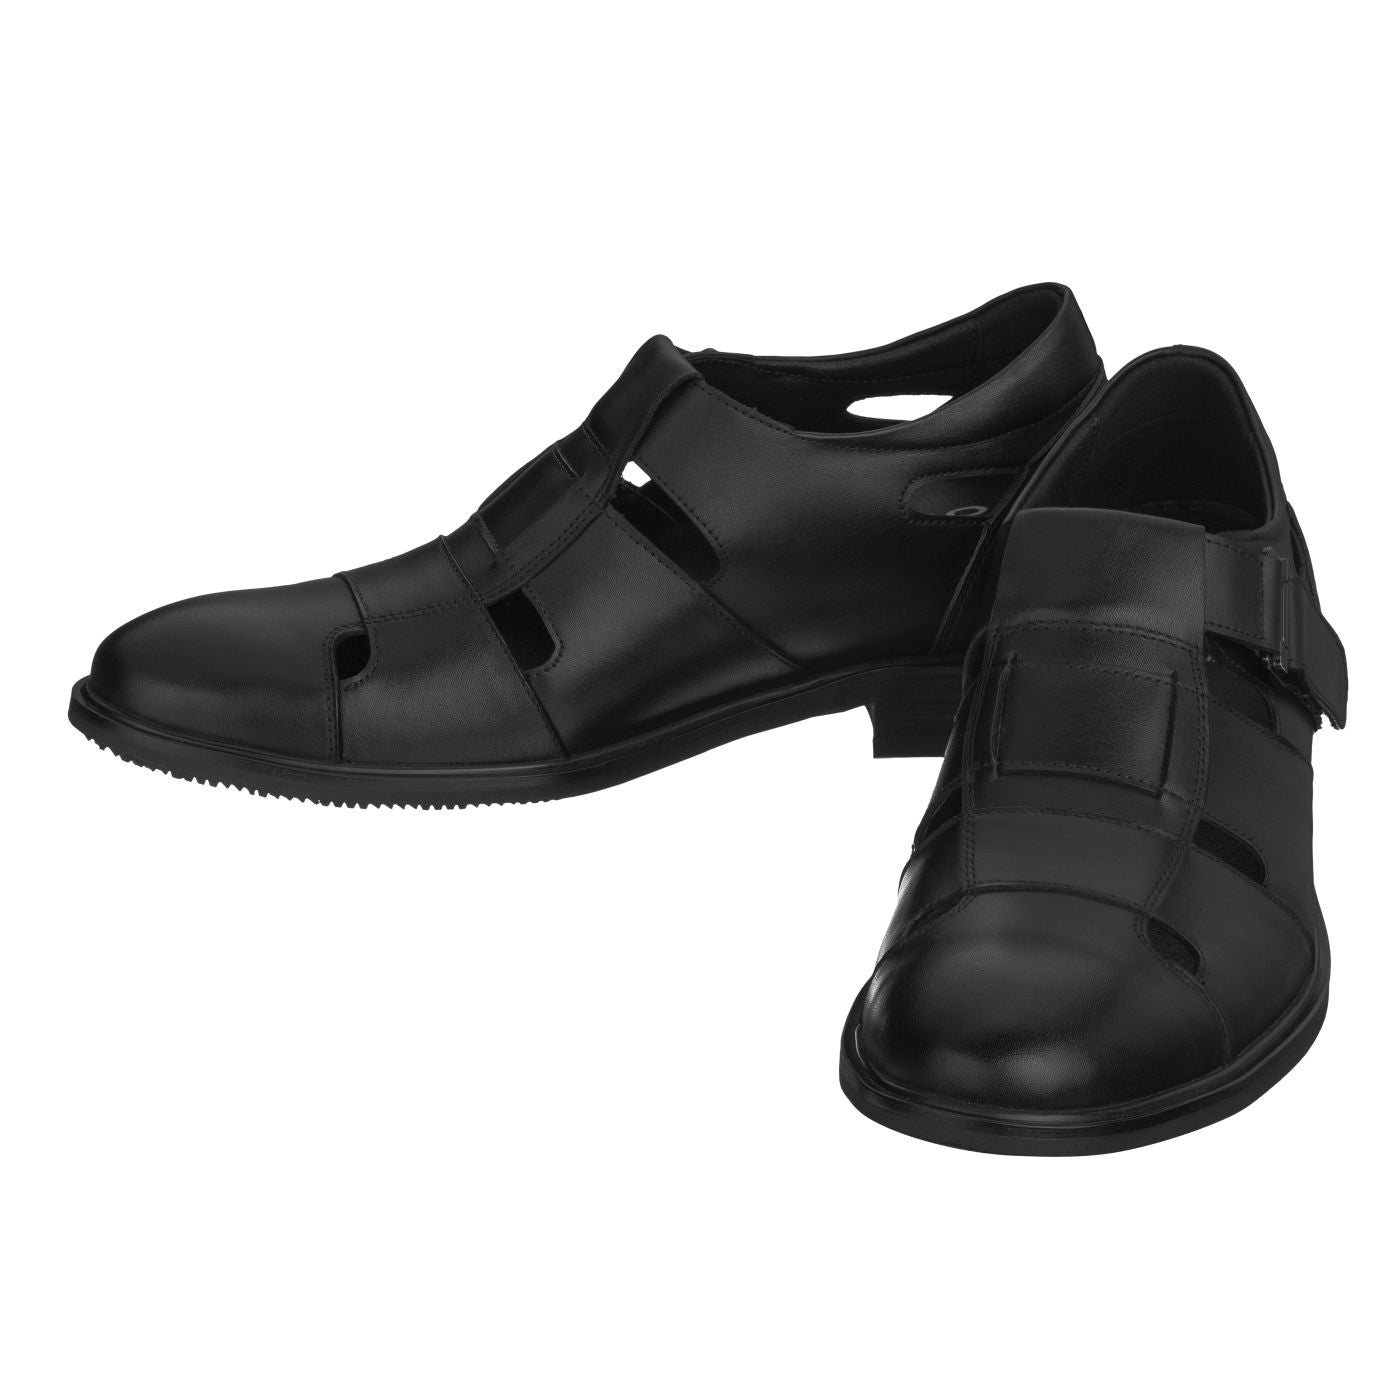 Elevator shoes height increase CALTO - S1062 - 2.8 Inches Taller (Black)